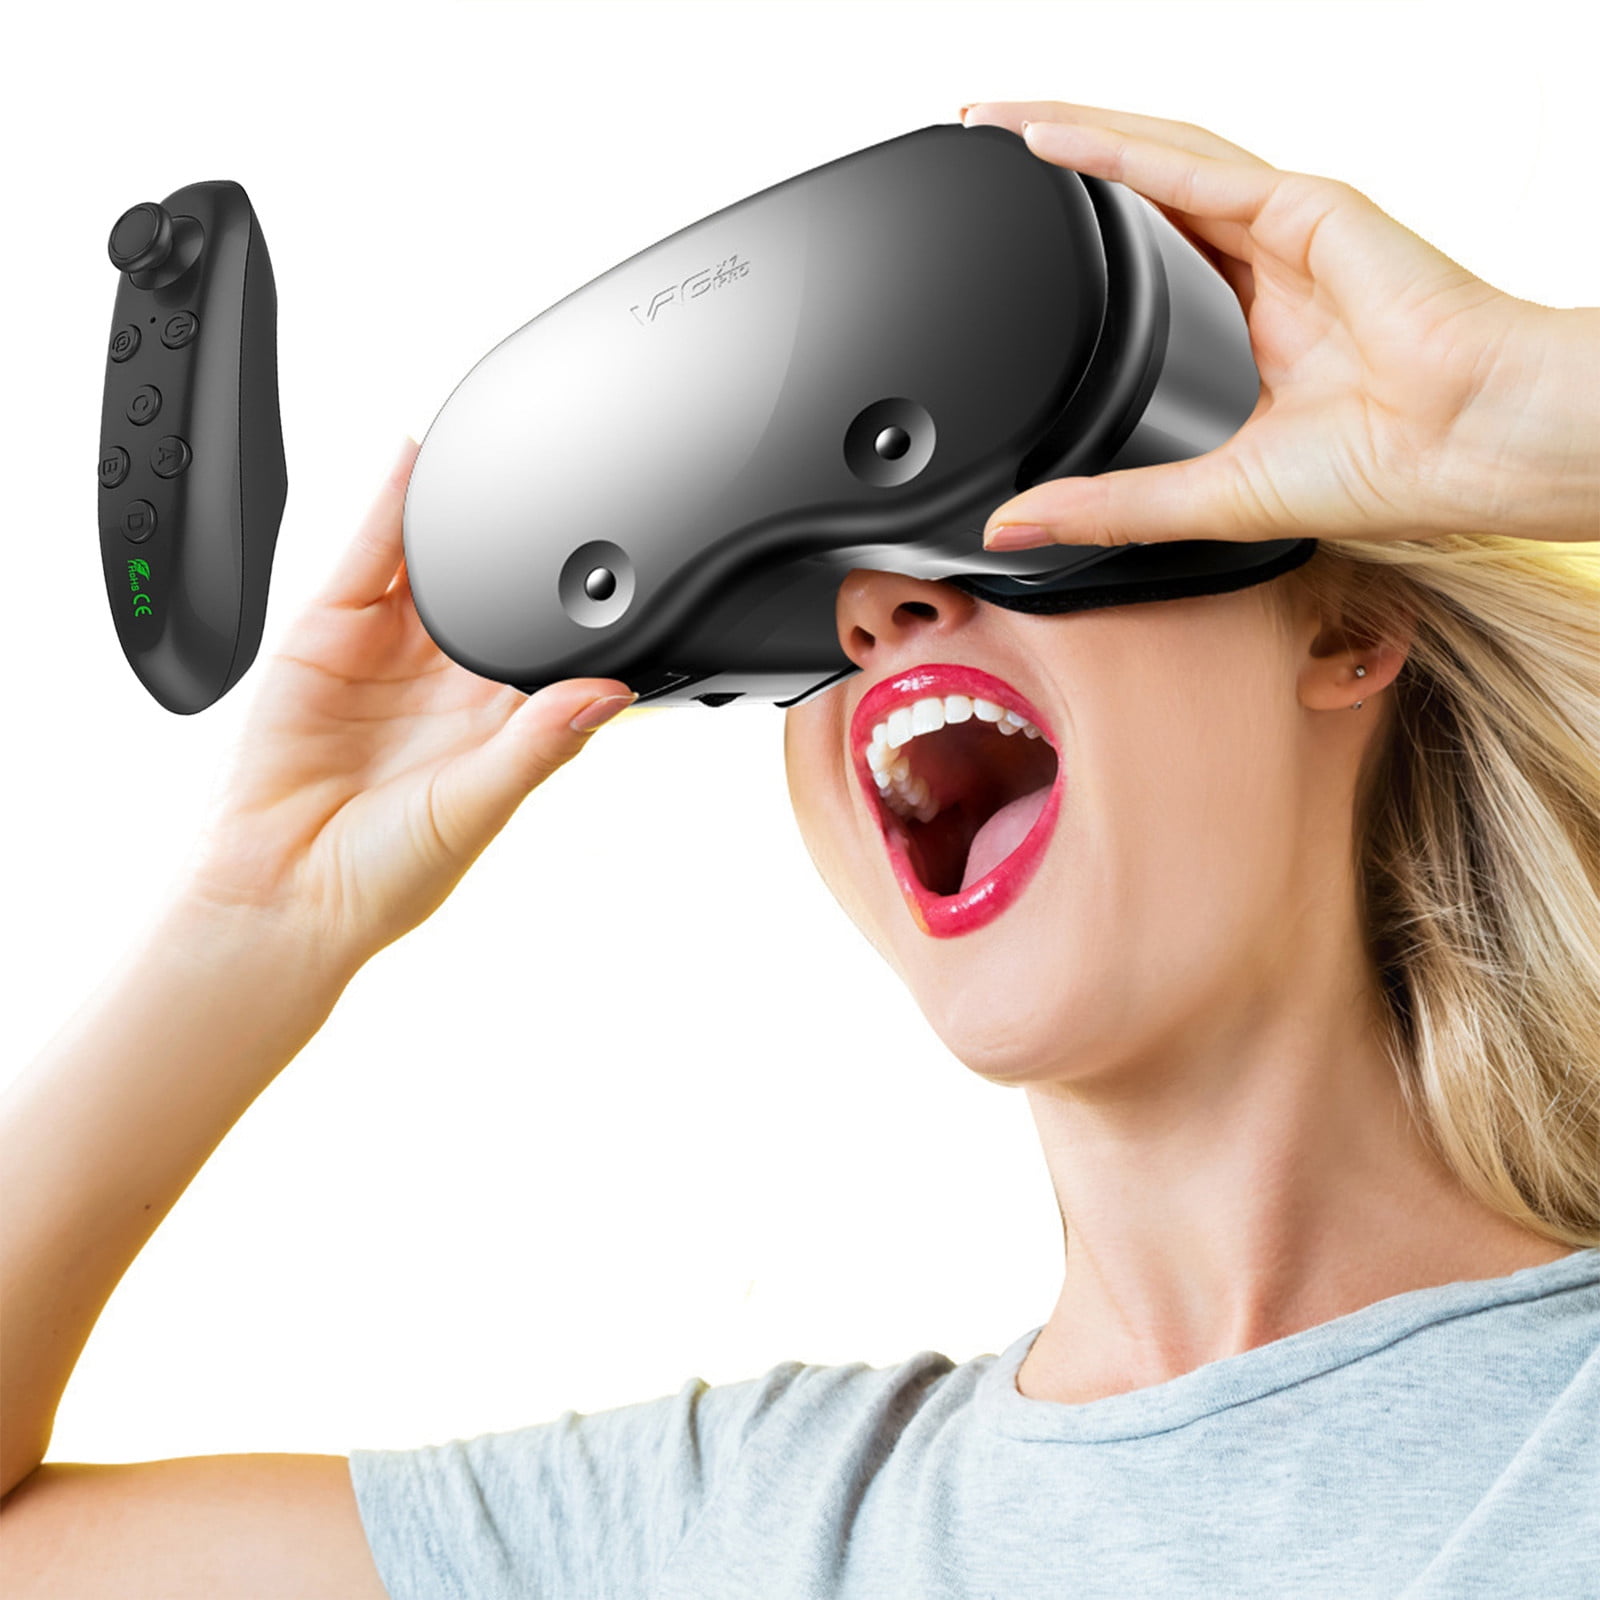 Åben Tålmodighed træk vejret KQJQS VR Blue Light Eye Protection Glasses Virtual Reality 3D Helmet Large  Screen IOS And Android System 3D Space Immersive Experience With Handle -  Walmart.com